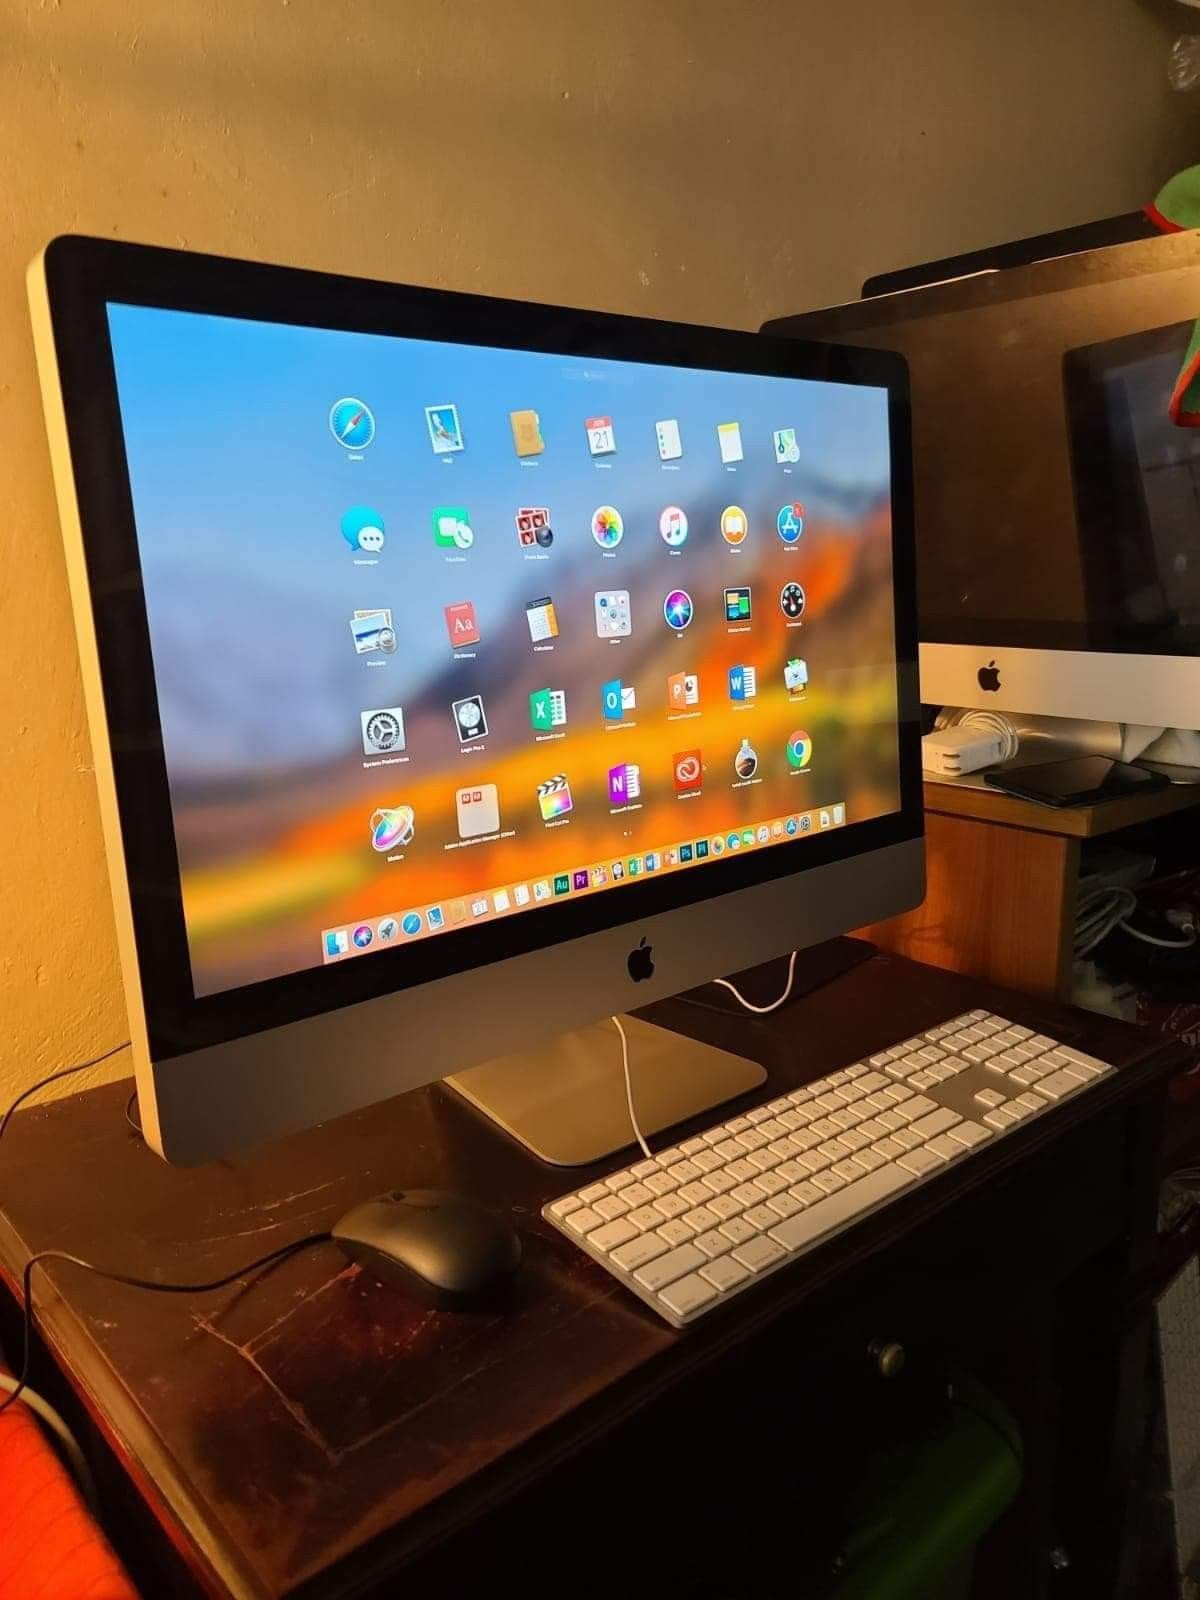 Excellent 21.5 inch Apple Imac Desktop computer with Intel Core i5 Proccesor with programs